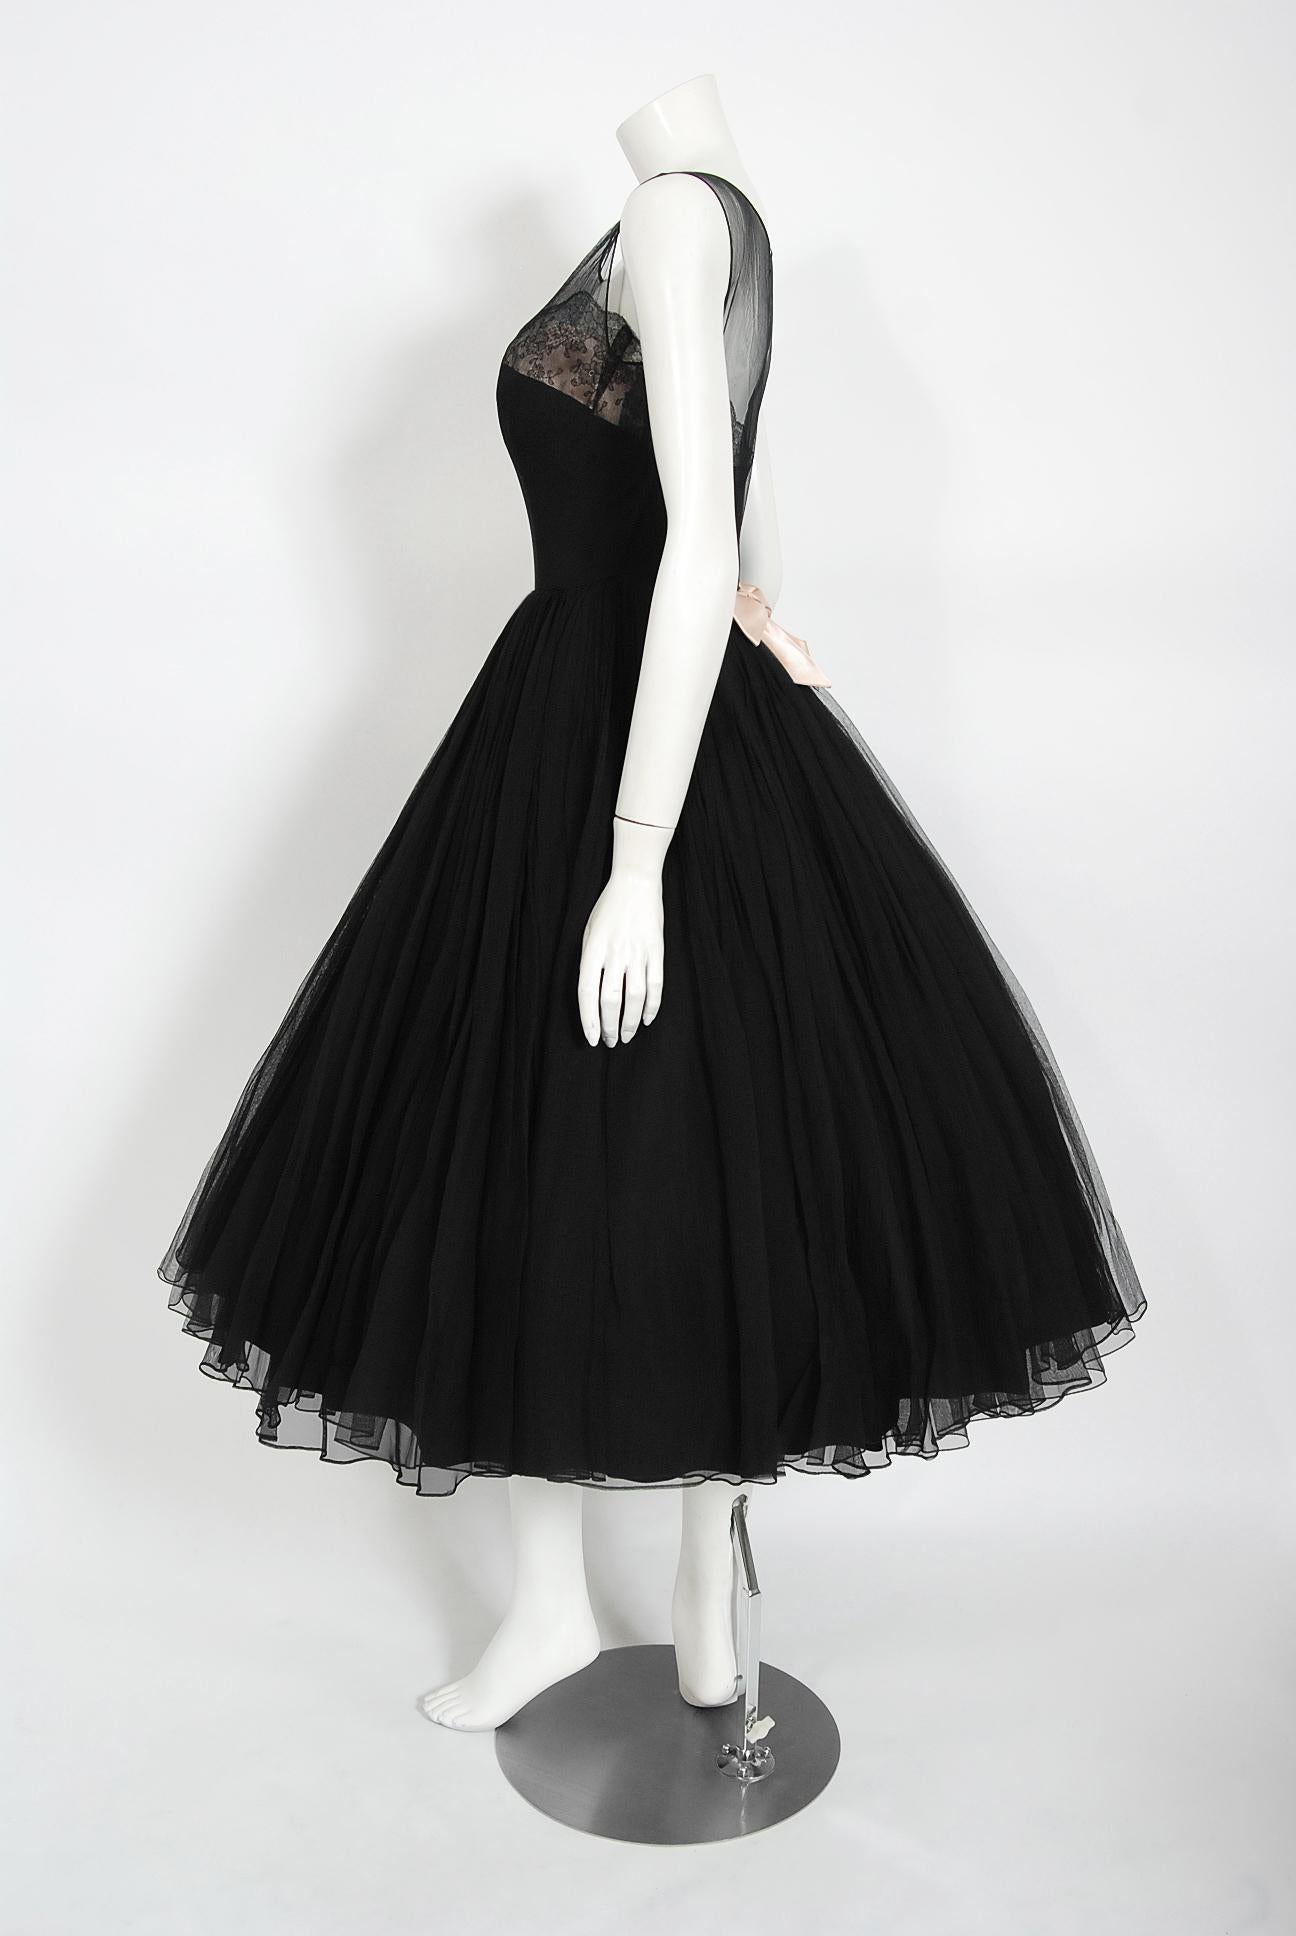 Vintage 1950's Harvey Berin Documented Black Chiffon and Lace Illusion ...